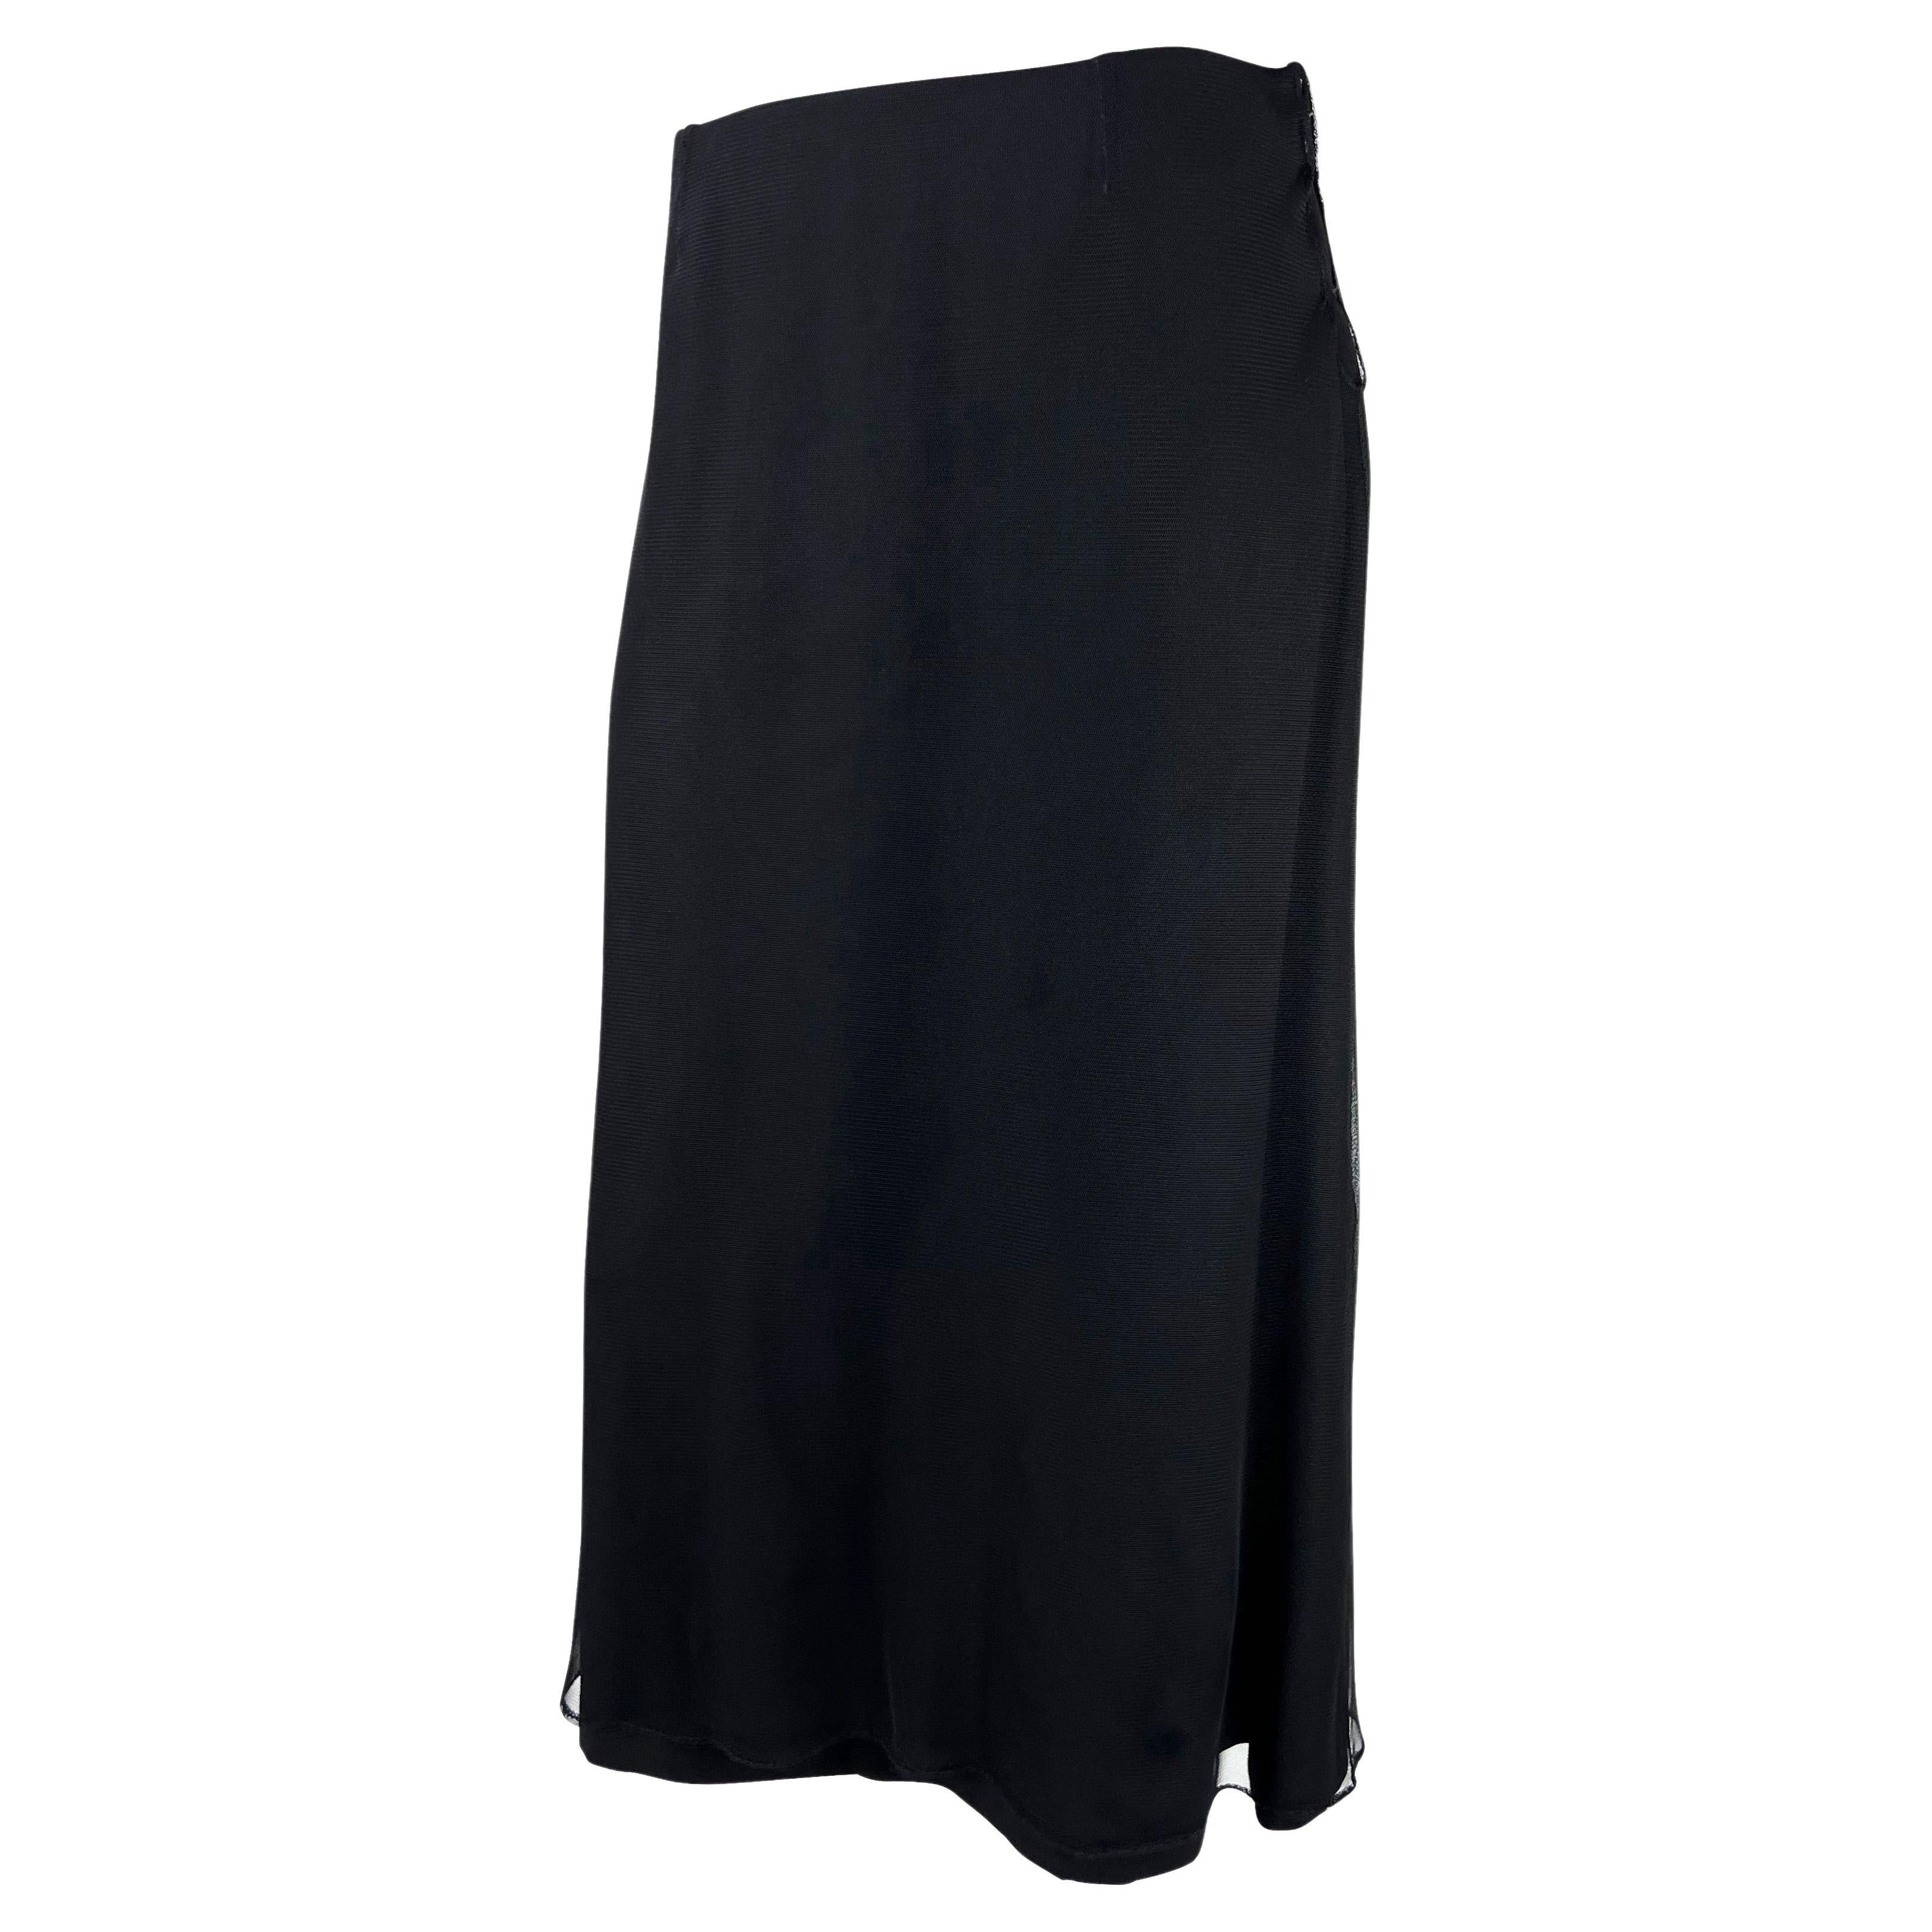 Presenting a black tulle Gucci skirt, designed by Tom Ford. From the Spring/Summer 1999 collection, this skirt was produced in limited numbers as a sample for the collection, making it a rare Gucci by Tom Ford piece. The skirt is constructed of a